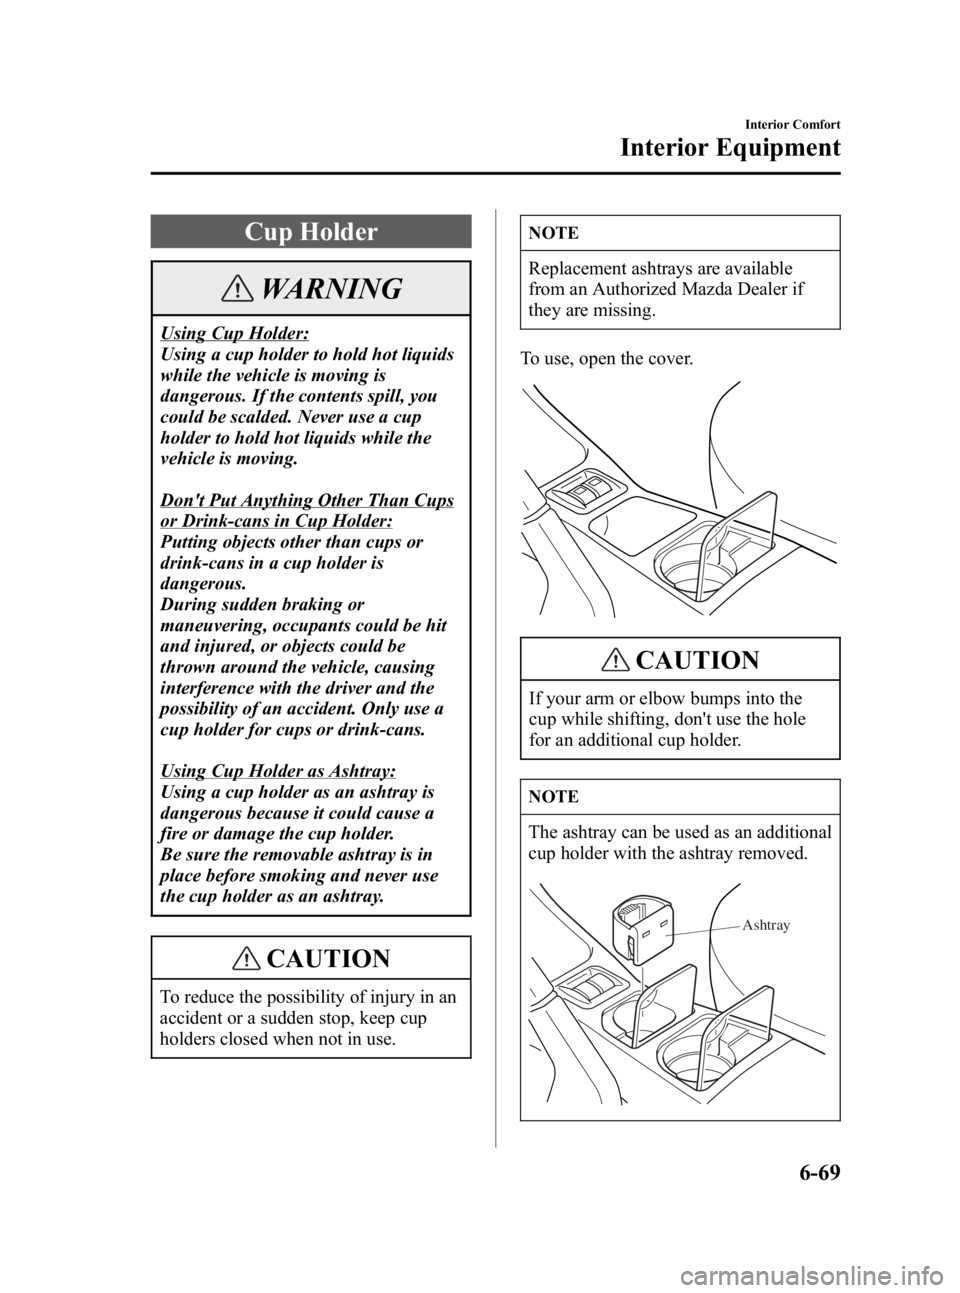 MAZDA MODEL MX-5 MIATA 2005  Owners Manual Black plate (195,1)
Cup Holder
WARNING
Using Cup Holder:
Using a cup holder to hold hot liquids
while the vehicle is moving is
dangerous. If the contents spill, you
could be scalded. Never use a cup
h